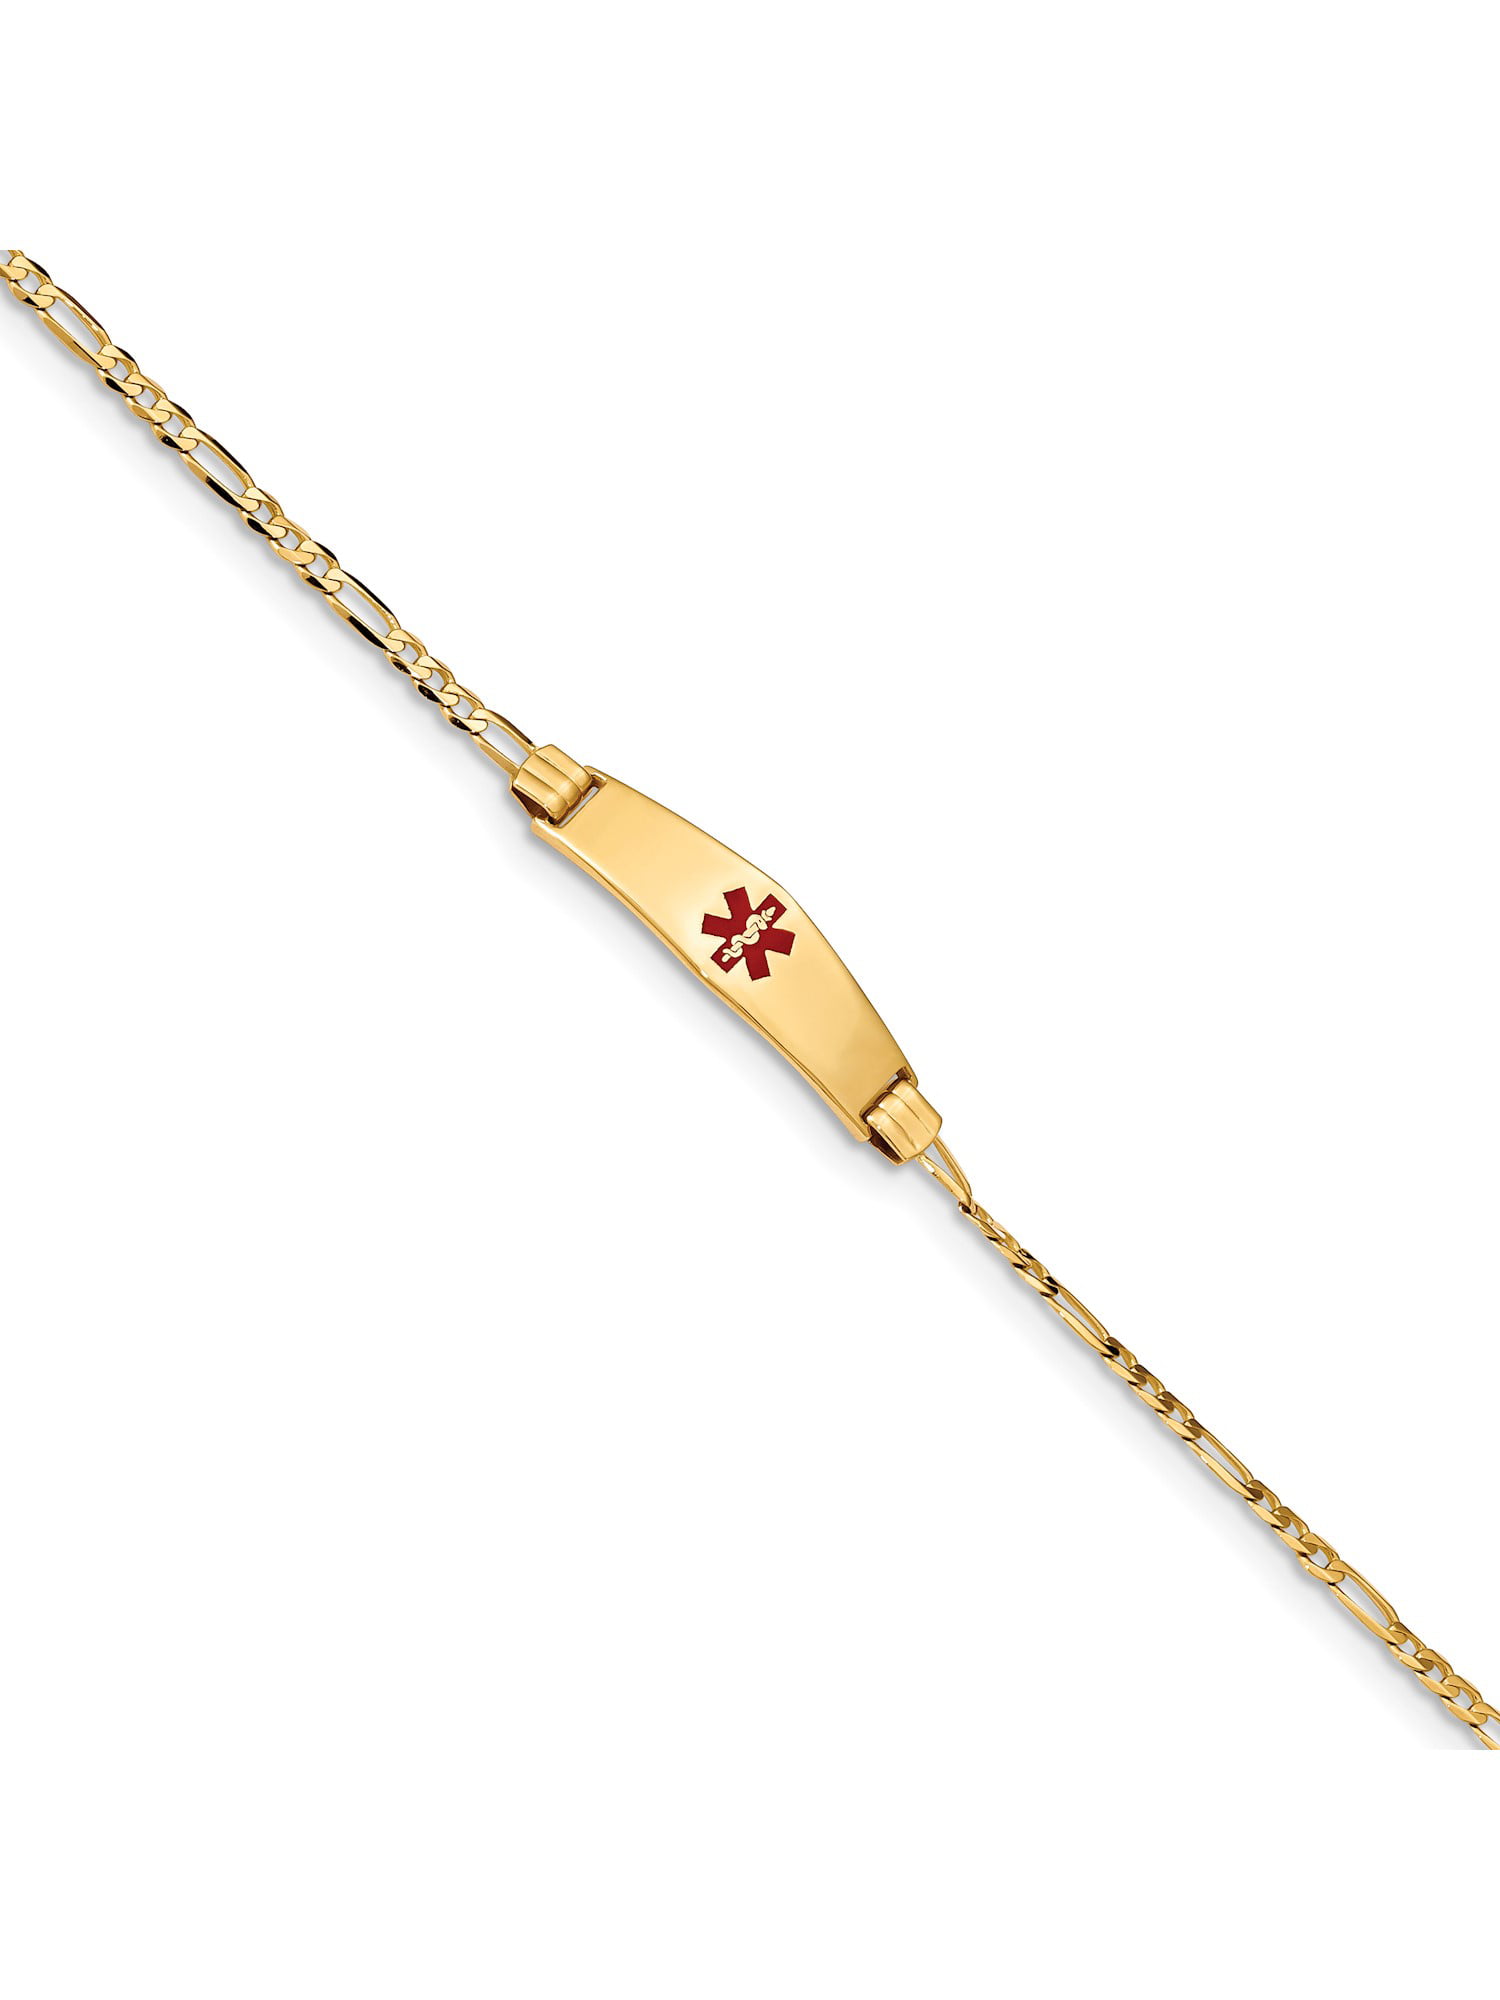 with Secure Lobster Lock Clasp 7.5mm Solid 14k Yellow Gold Medical Soft Diamond-Shape Red Enamel Figaro ID Bracelet